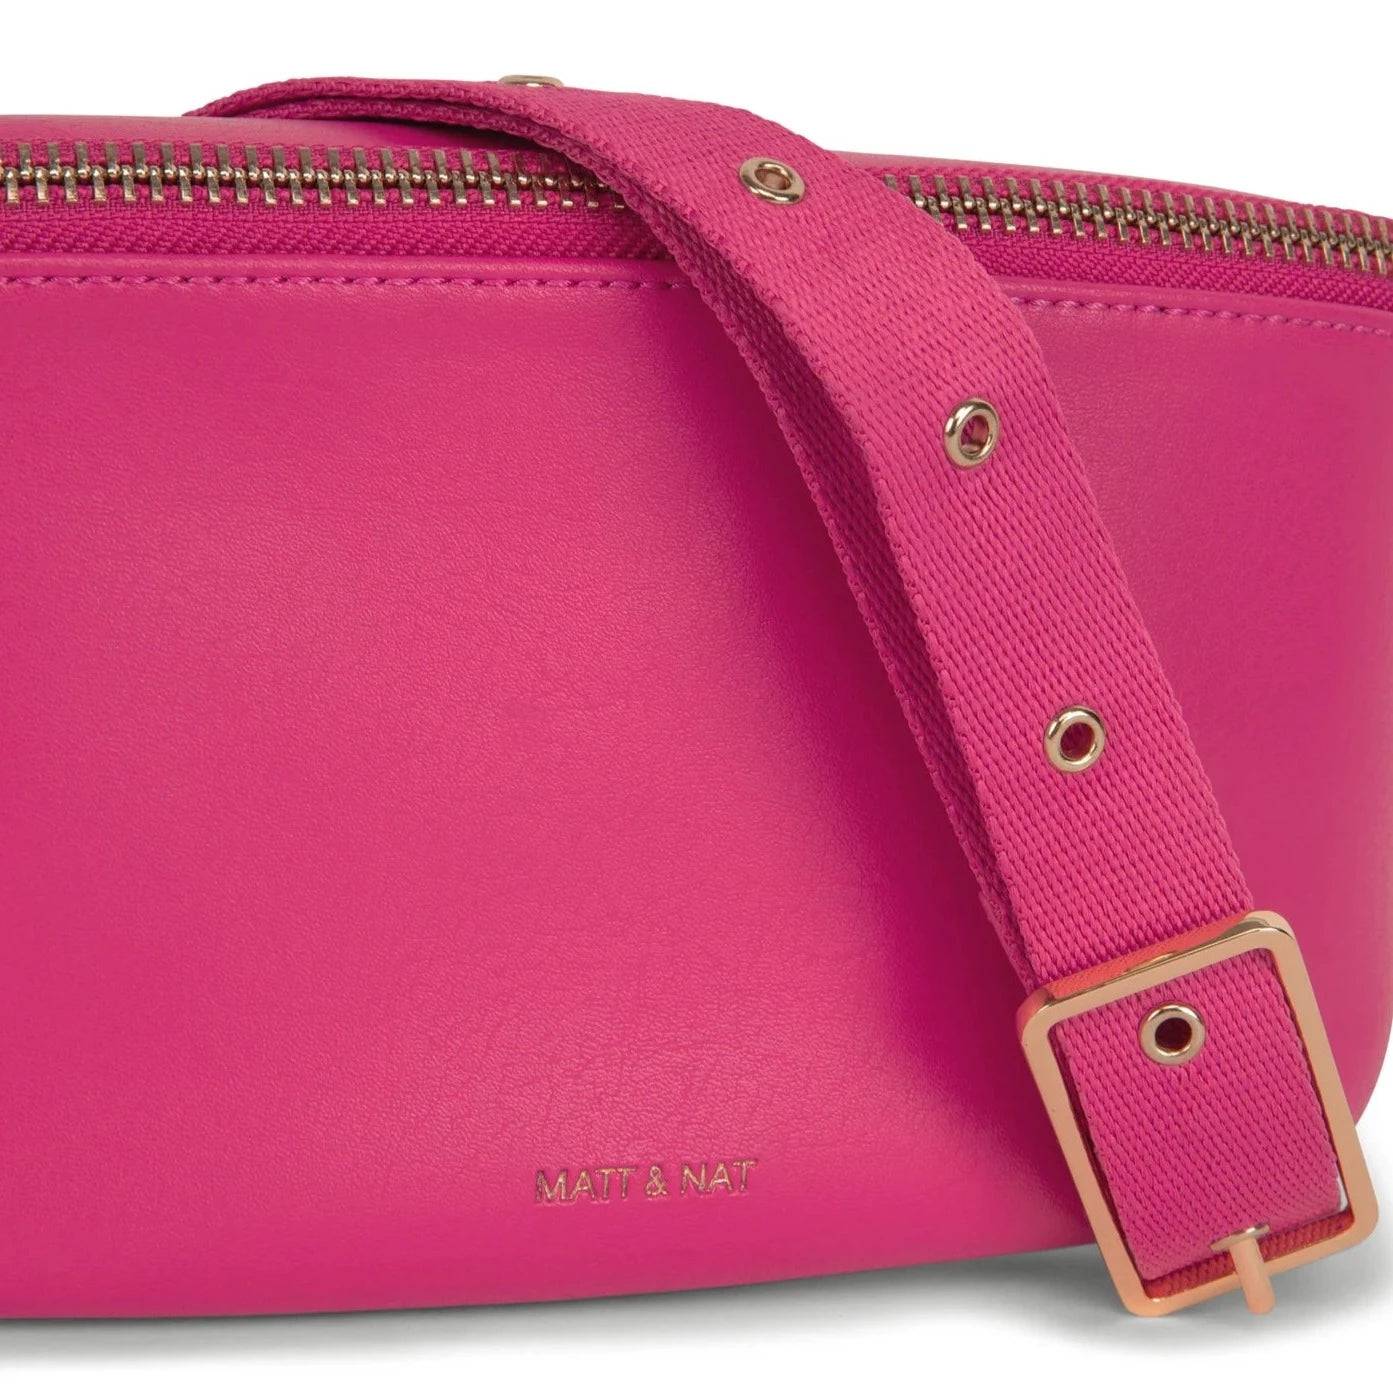 Vie | Vegan Fanny Pack (SALE) - The Local Space